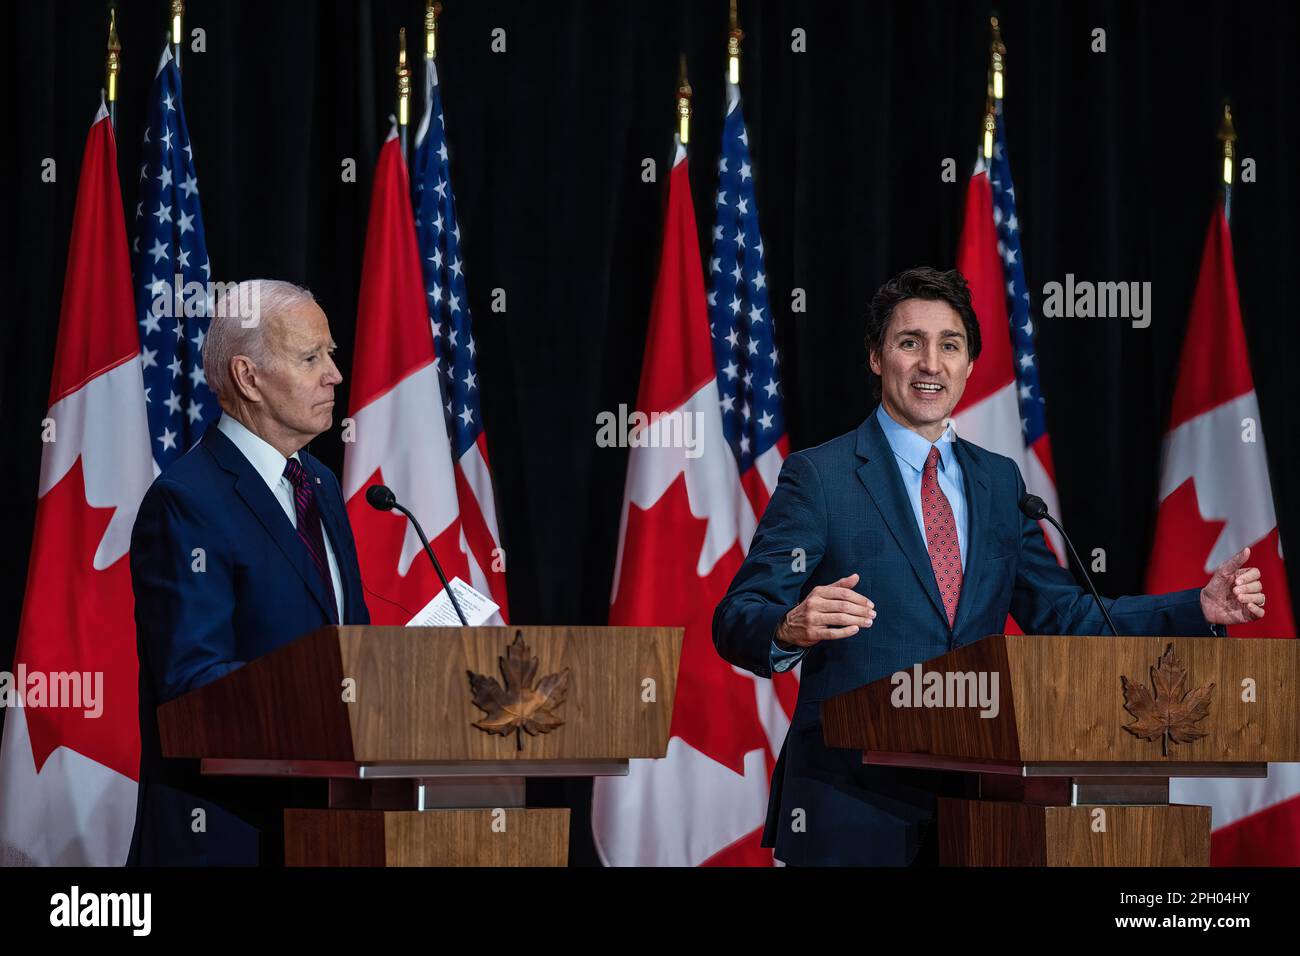 Ottawa, Canada. 24th Mar, 2023. Canadian Prime Minister Justin Trudeau speaks during a joint press conference with U.S. President Joe Biden at the Sir John A. Macdonald Building in Ottawa. This is the first official visit that the American president has made to Canada since becoming president. Though visits between elected presidents and the allied country typically take place sooner, Biden's inaugural visit to the northern neighbor was delayed due to COVID-19 travel restrictions. (Photo by Katherine KY Cheng/SOPA Images/Sipa USA) Credit: Sipa USA/Alamy Live News Stock Photo